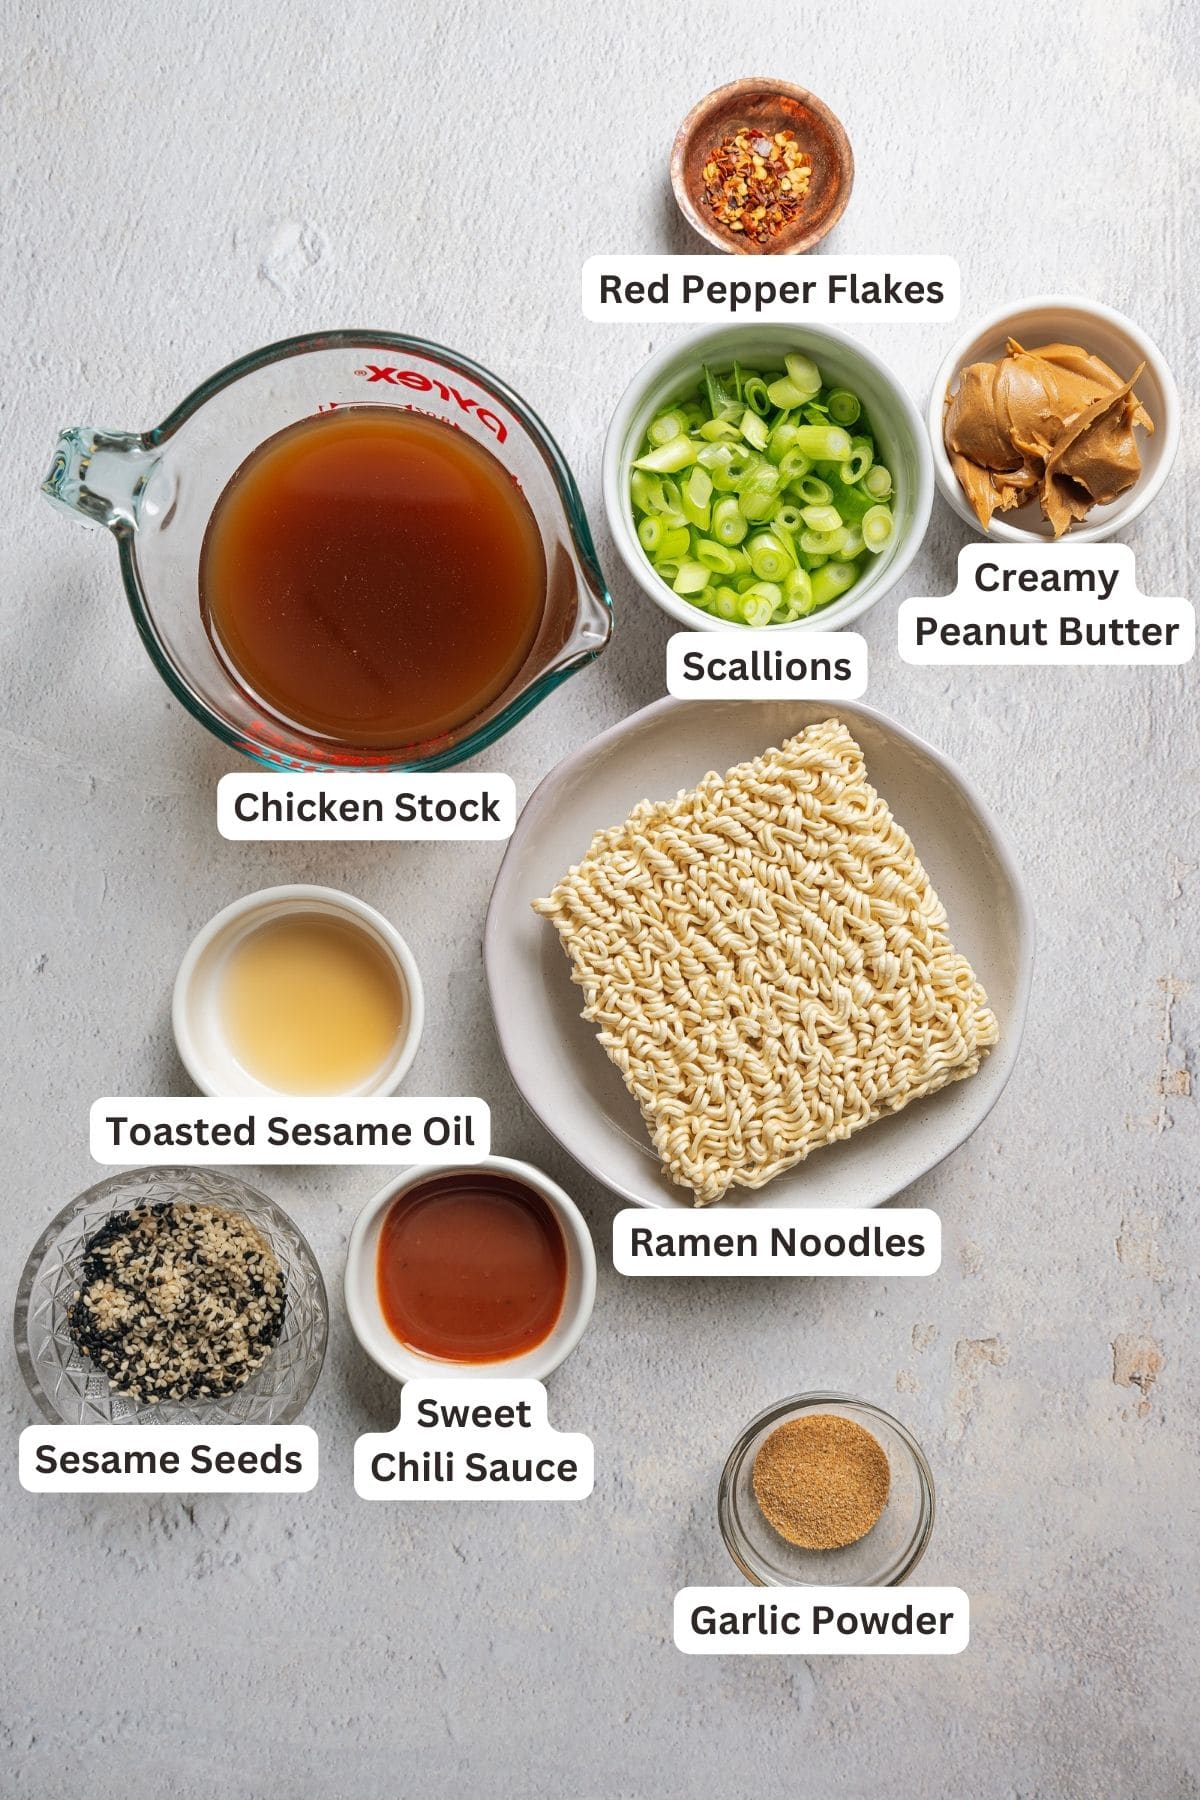 Labeled ingredients for peanut butter ramen.